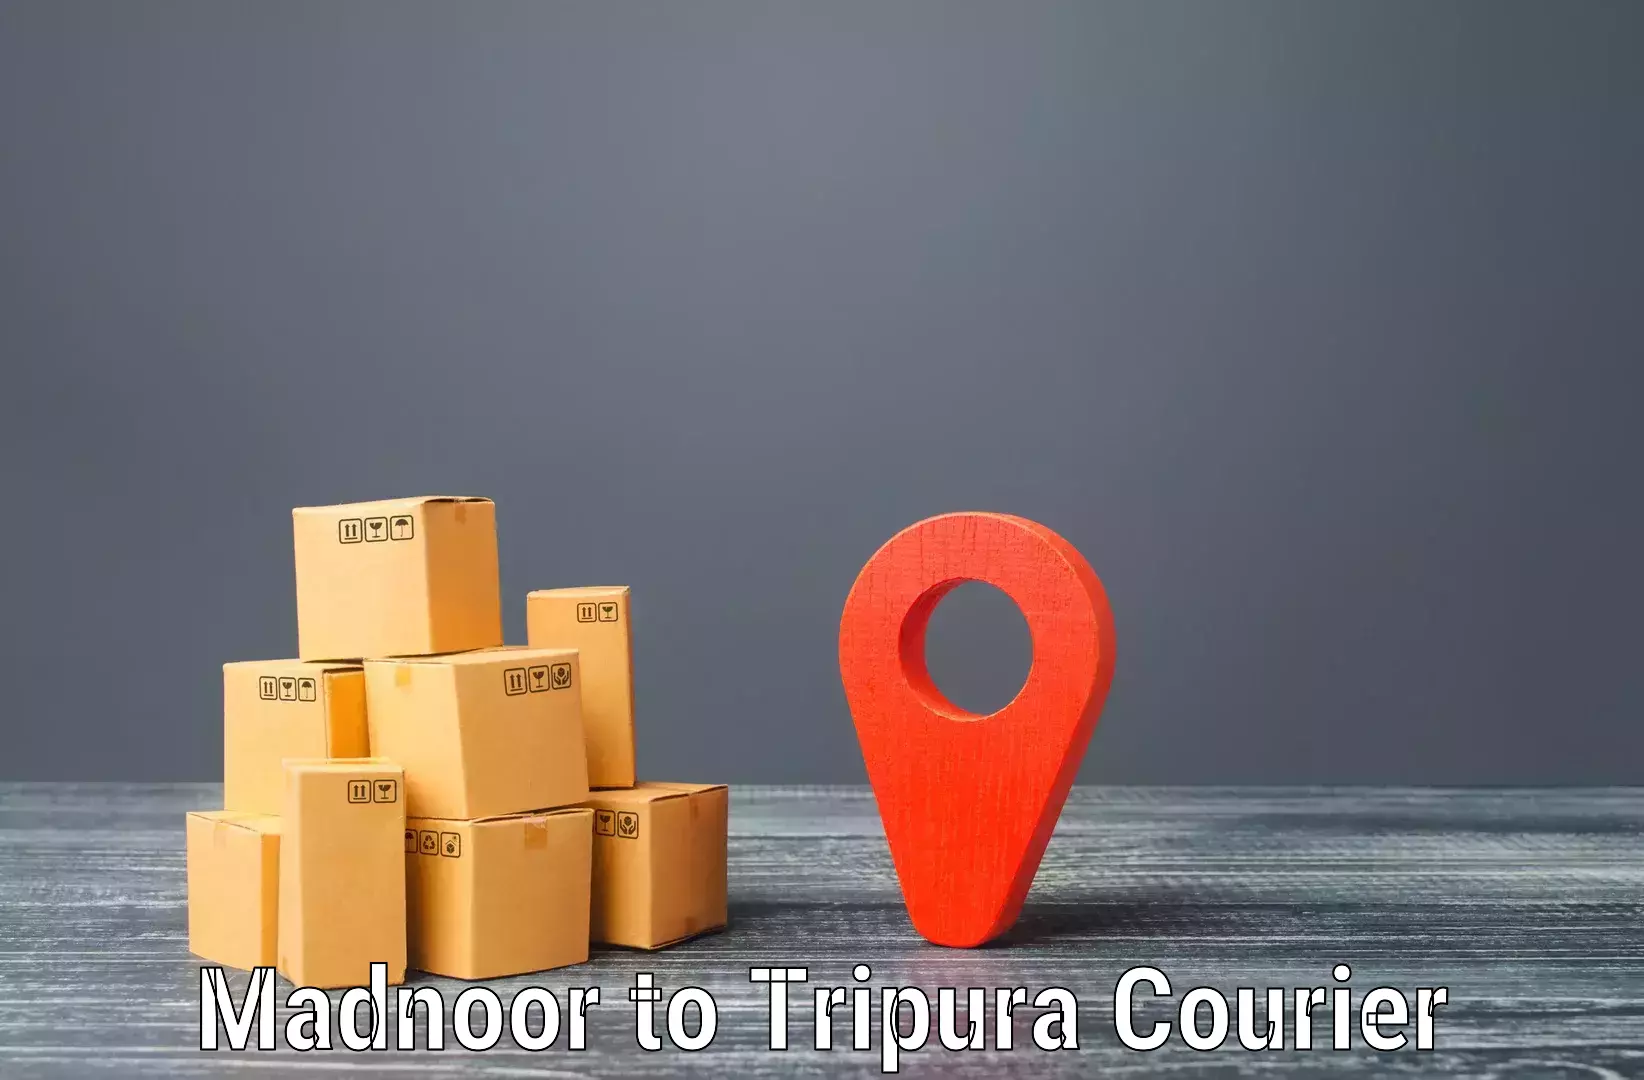 Tech-enabled shipping Madnoor to Tripura